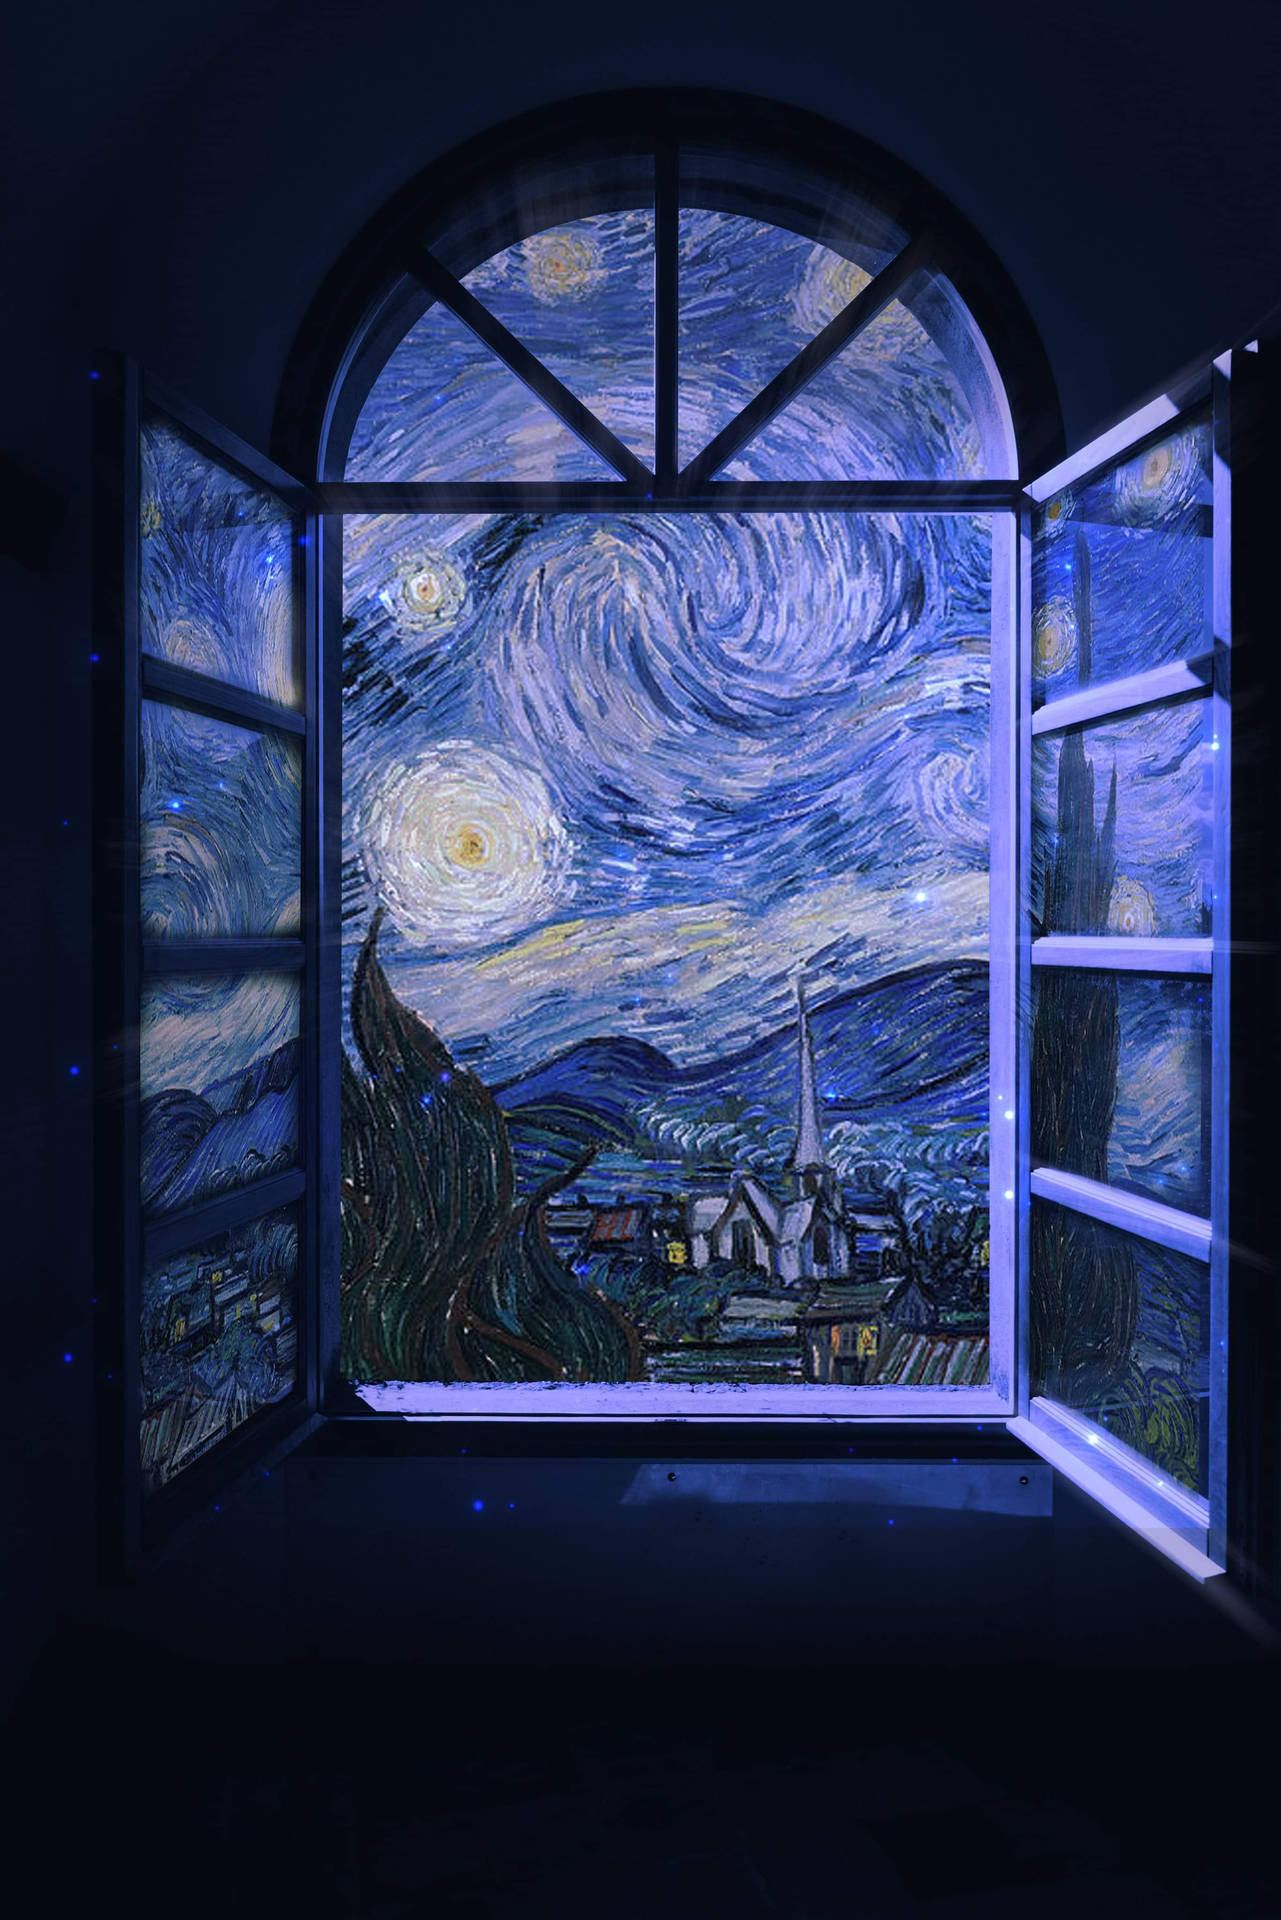 Top 999+ Van Gogh Starry Night Wallpapers Full HD, 4K✅Free to Use